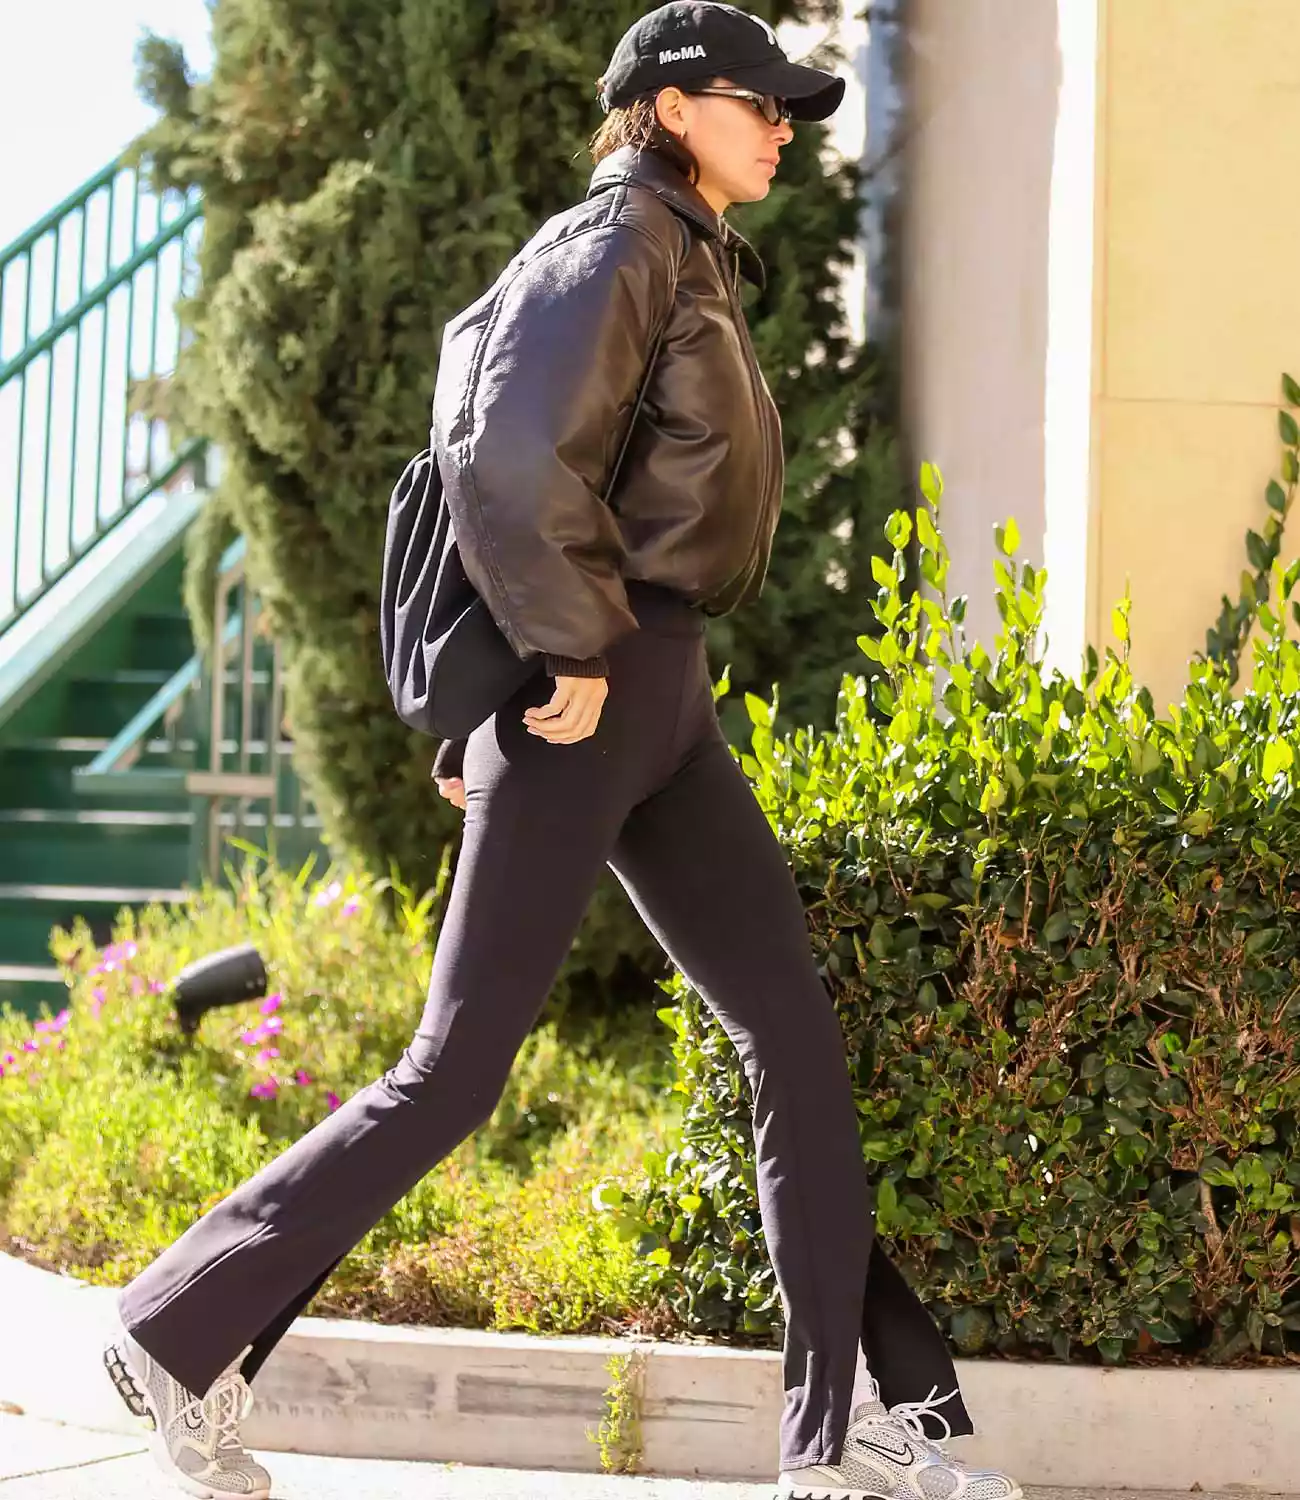 Kendall Jenner wearing flared yoga pants in Los Angeles in January 2023.